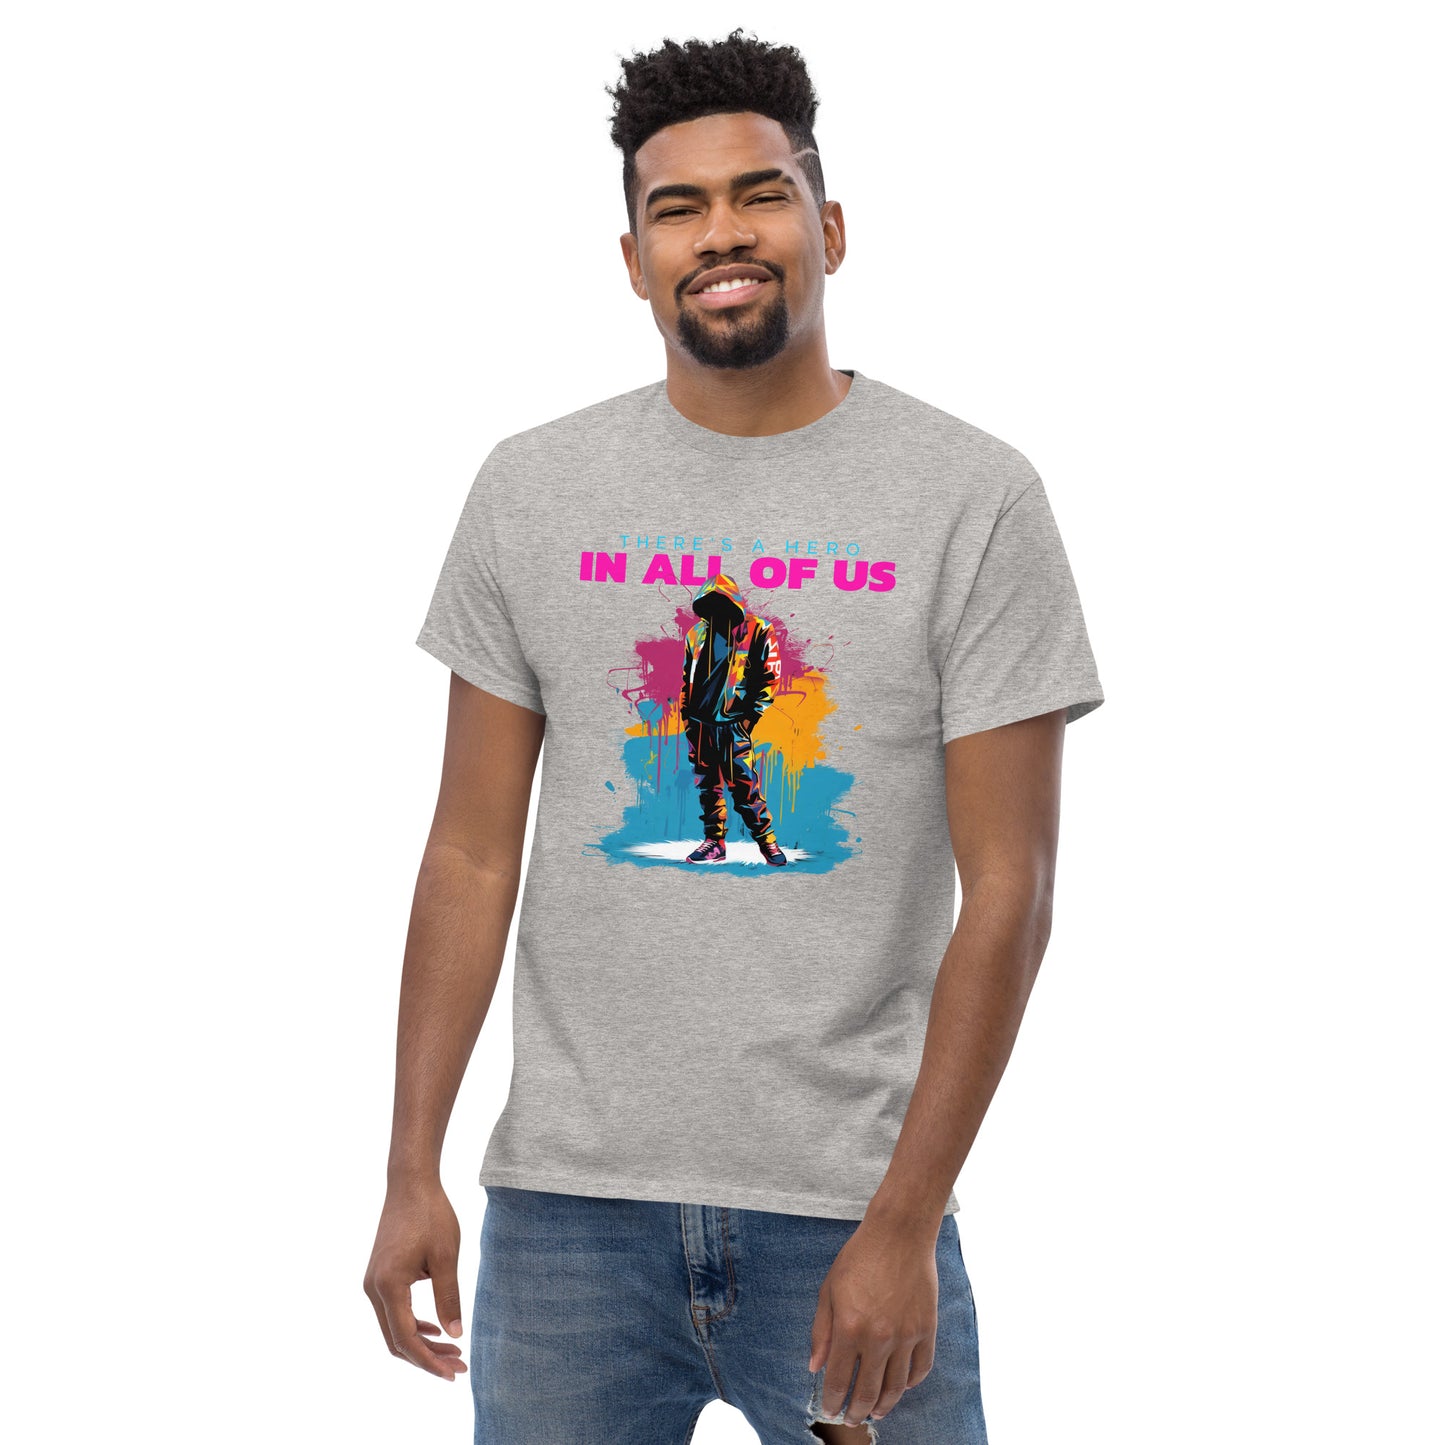 "There's a Hero in all of us" Men's classic tee